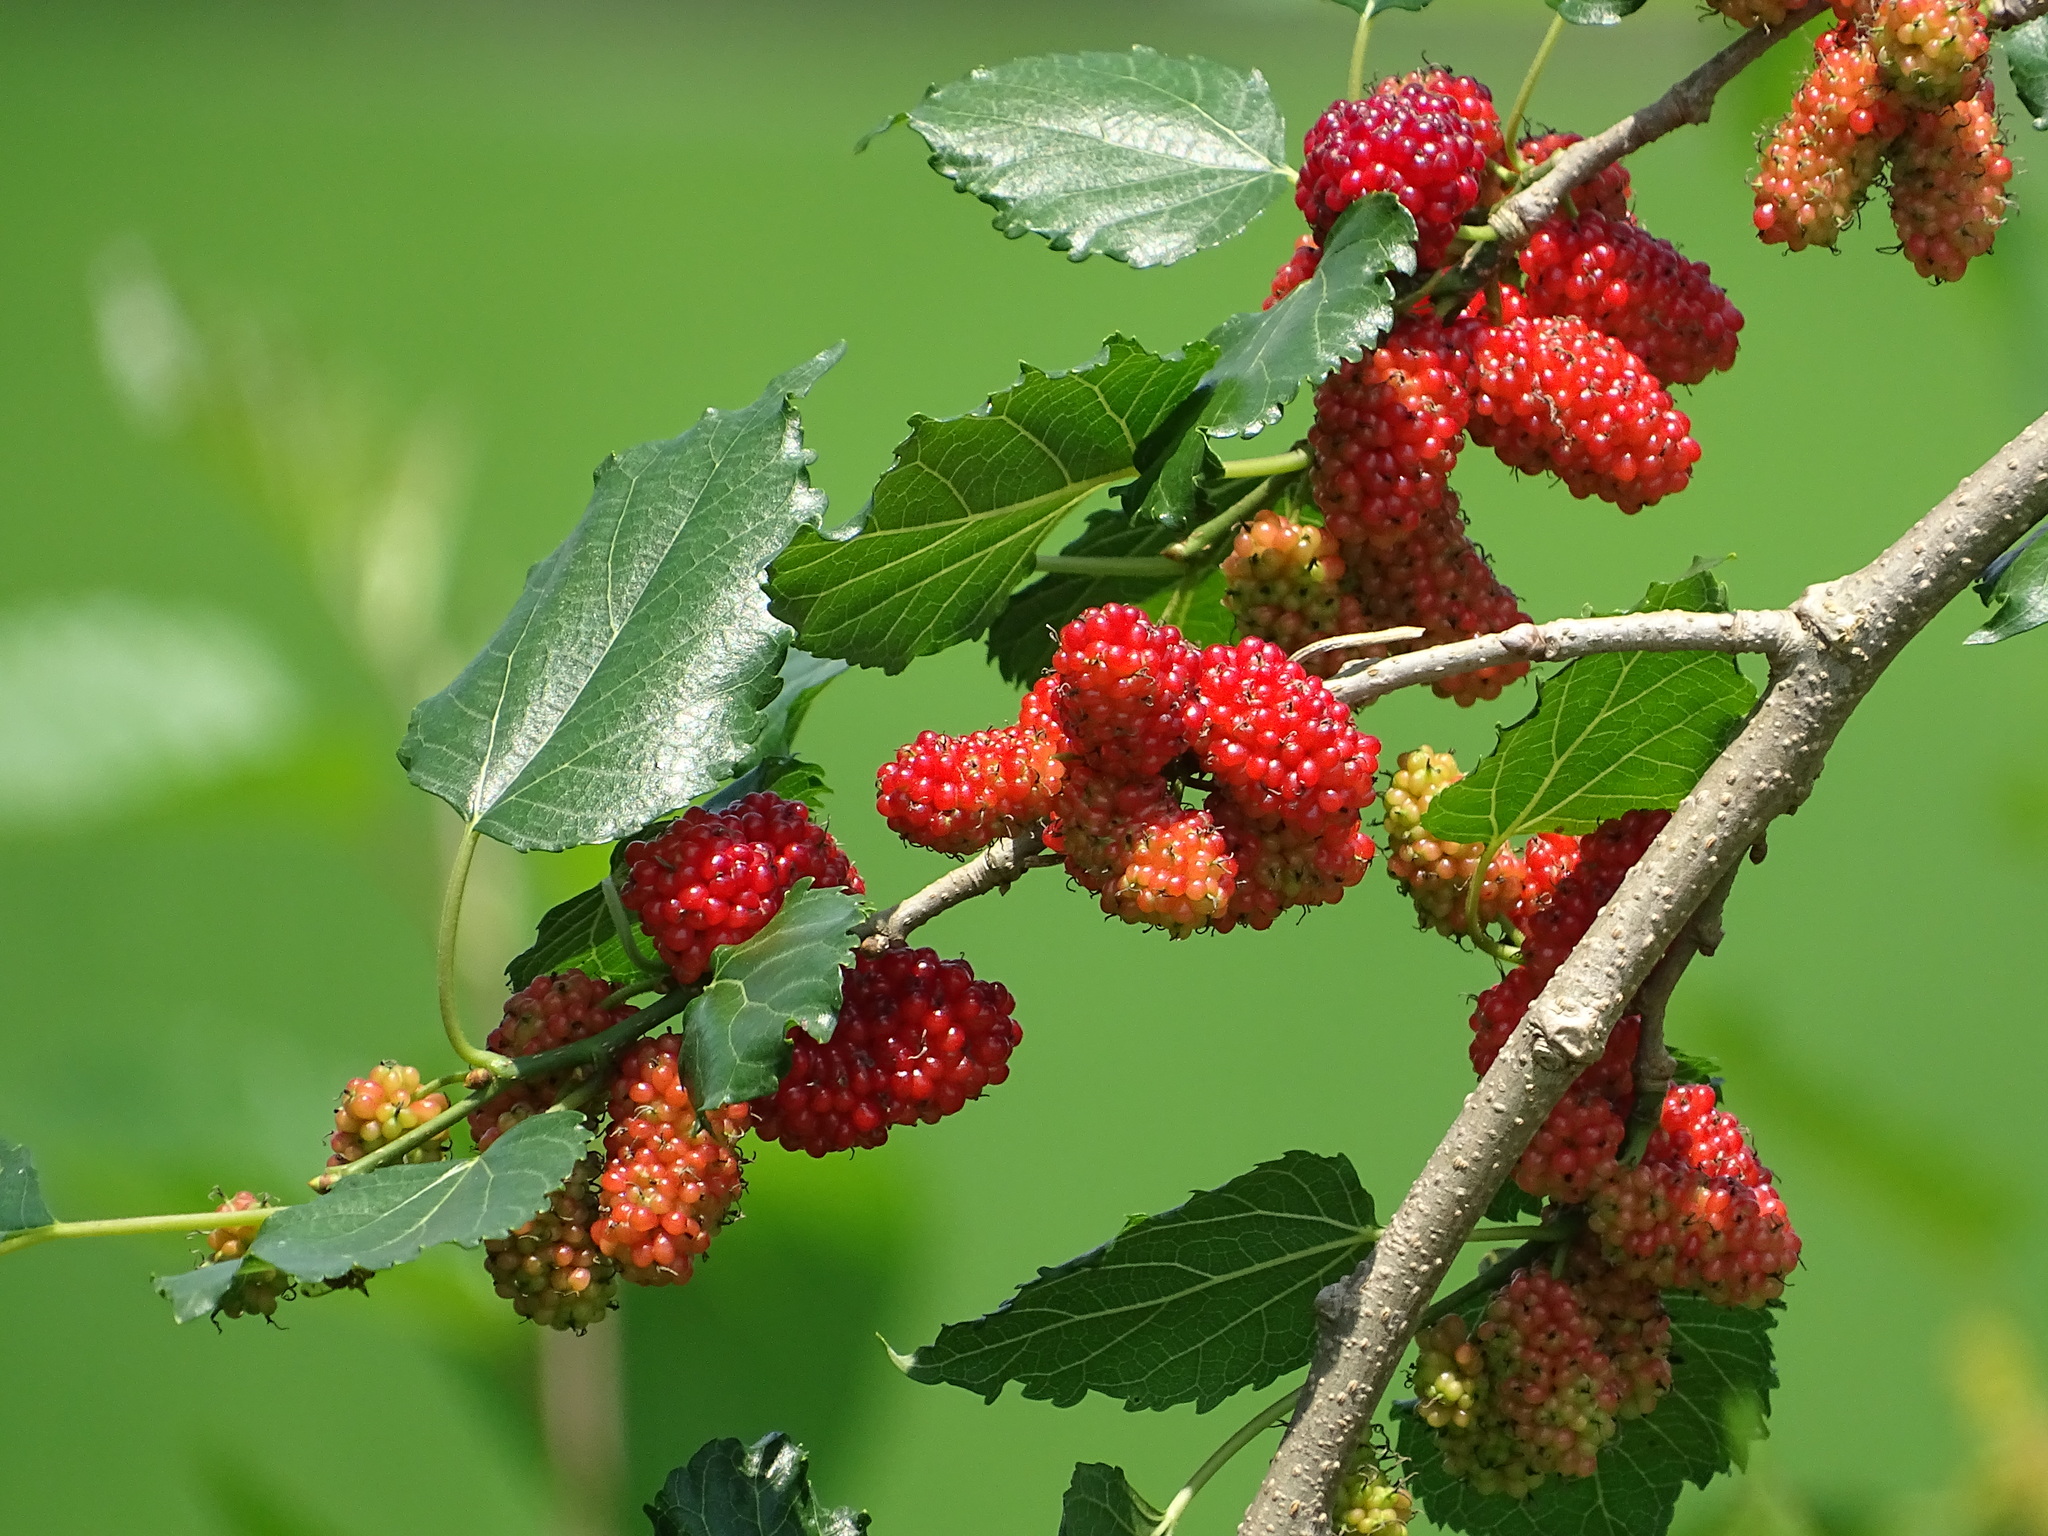 About Mulberry, Mulberry Story, Mulberry World, Mulberry